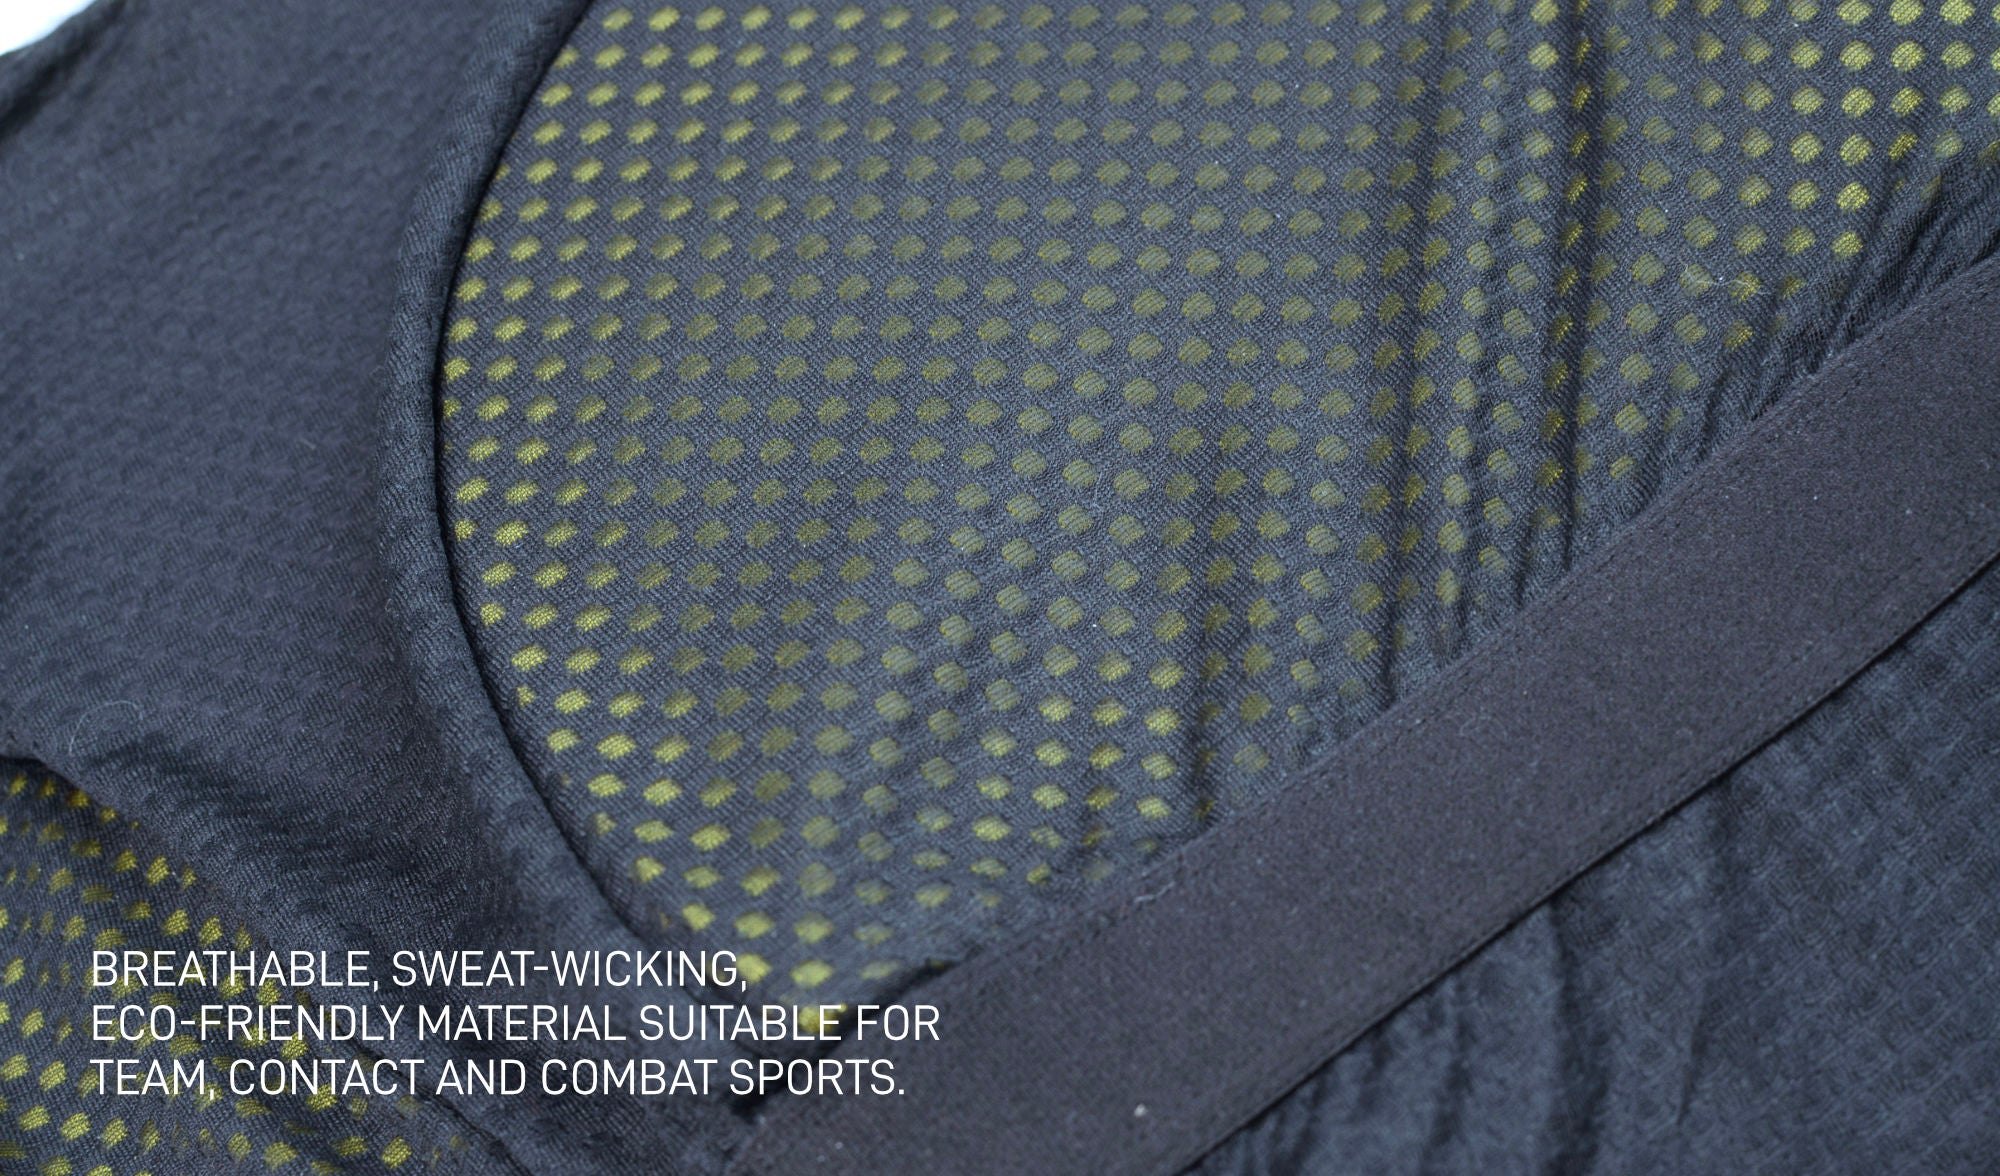 Inside of the AAVA Armoured Sports Bra: breathable mesh lining, support band and Poron XRD® material covering the chest area.